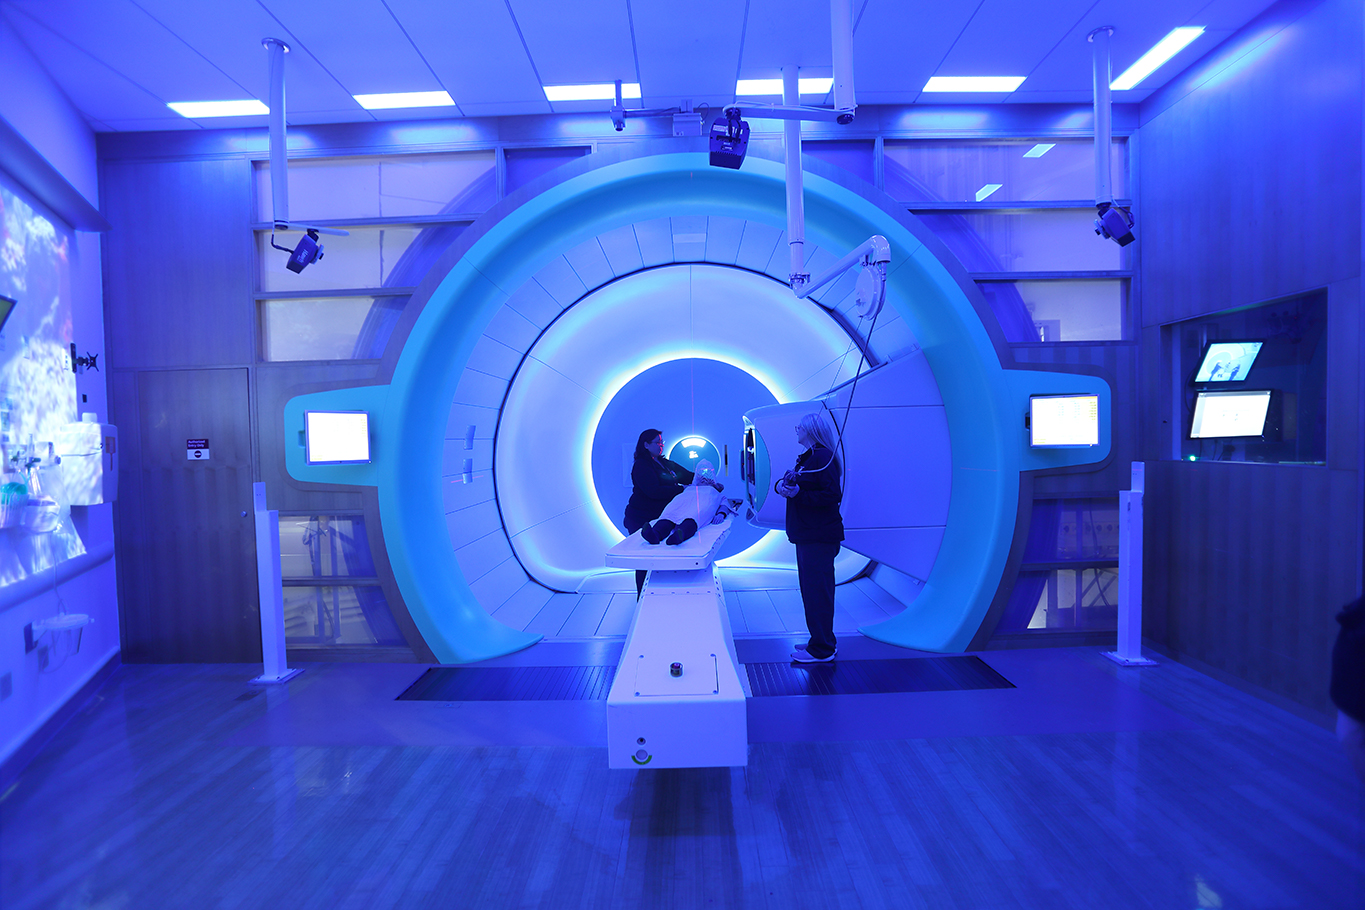 A patient is prepared to receive proton therapy in a blue-lit room with a large rotational machine